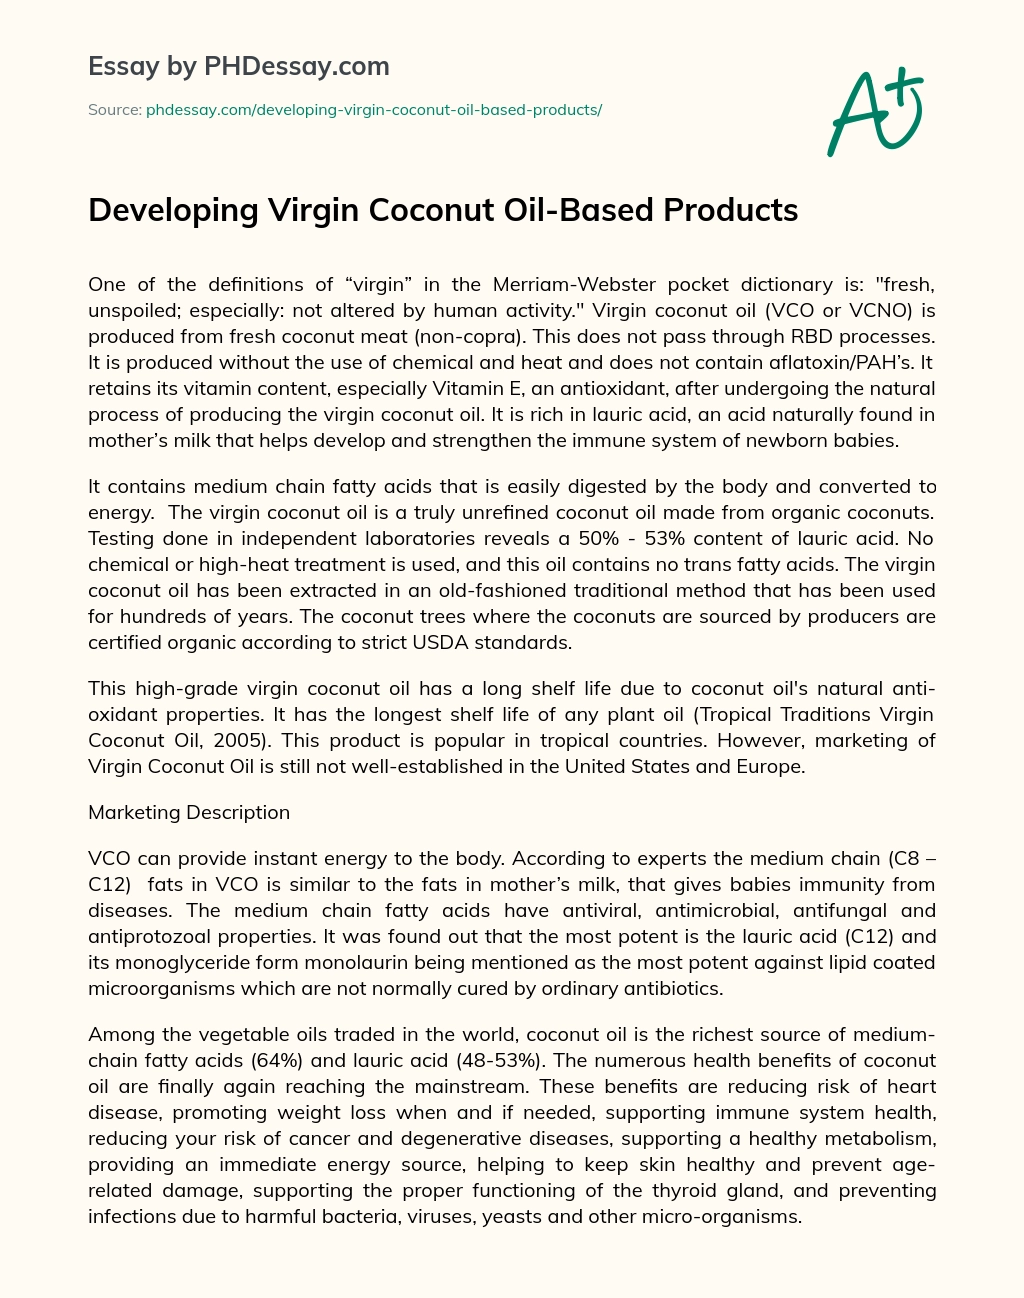 Developing Virgin Coconut Oil-Based Products essay